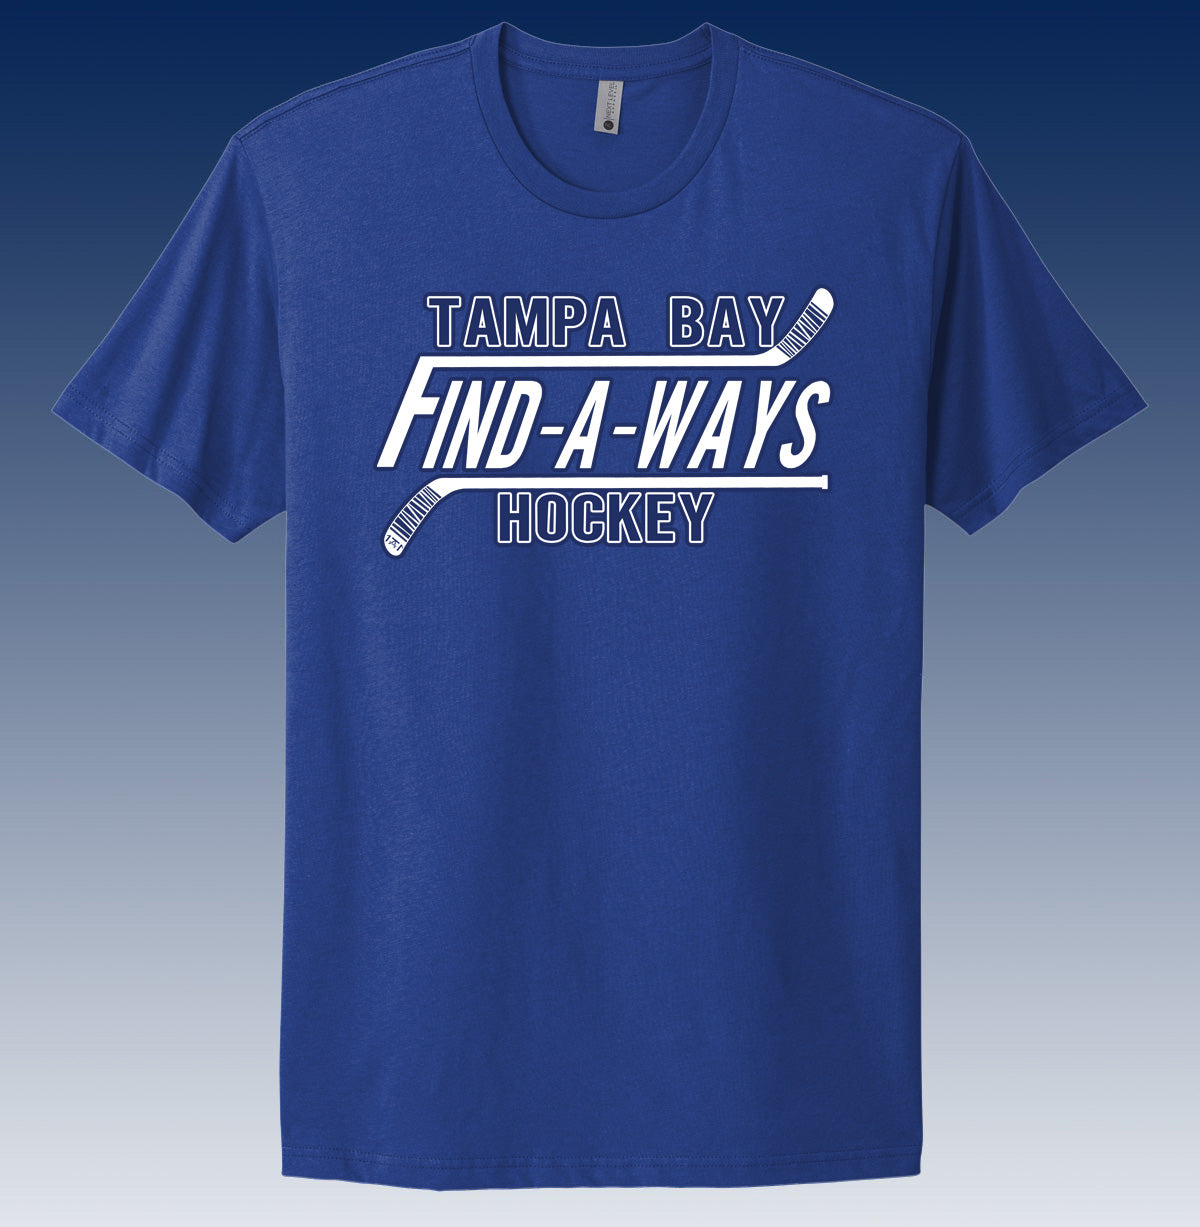 Blue t shirt featuring tampa bay lightning quote find a ways - locally made hockey shirt